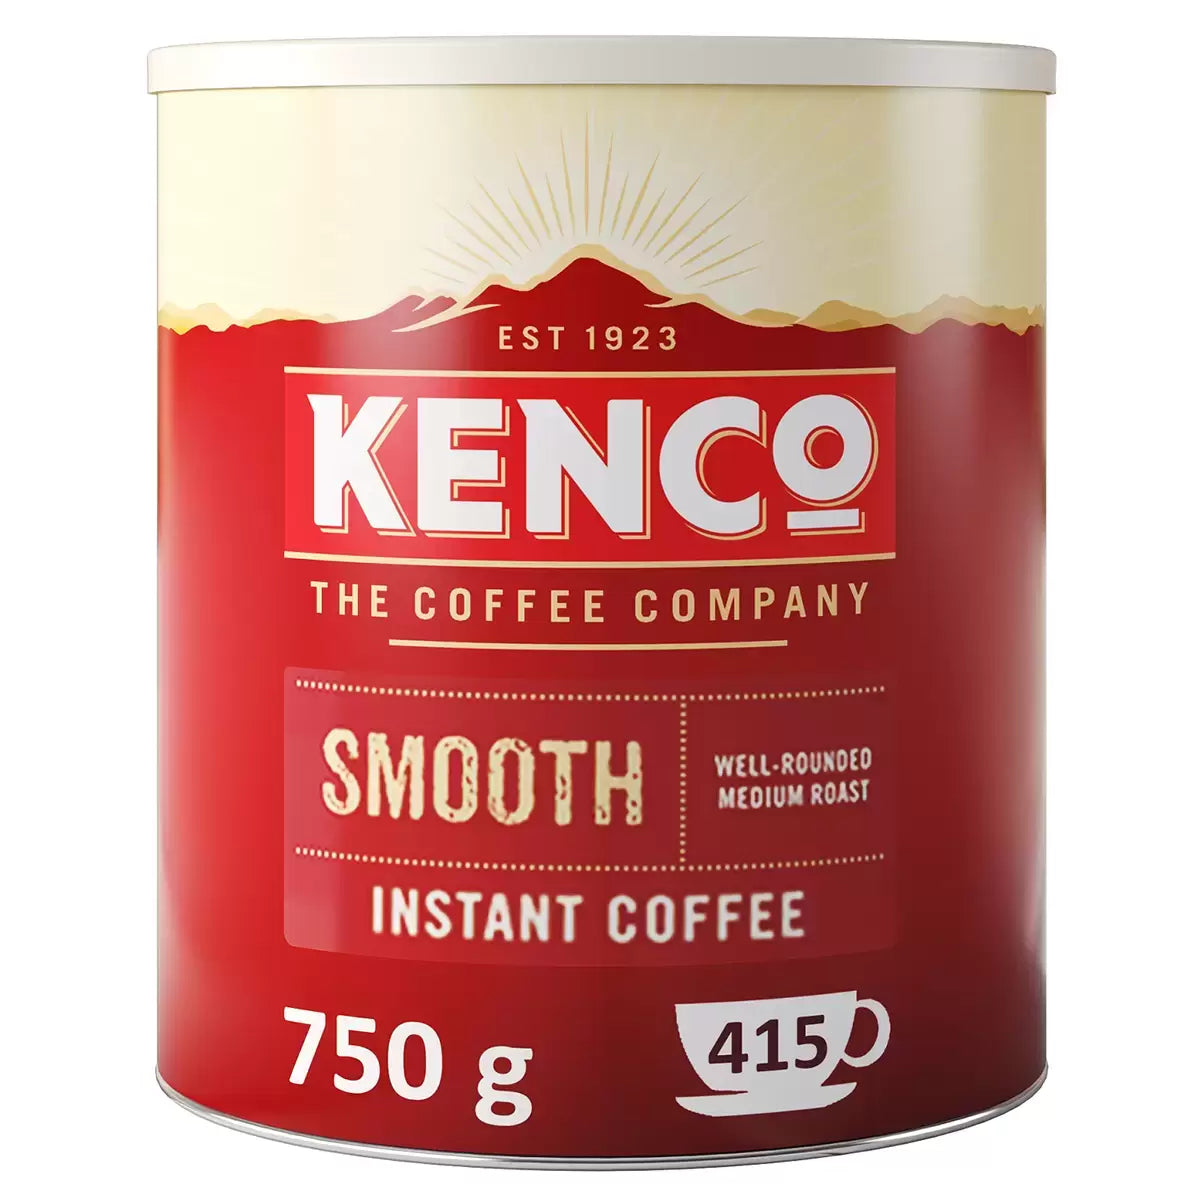 Kenco Smooth Instant Coffee Granules - 750g